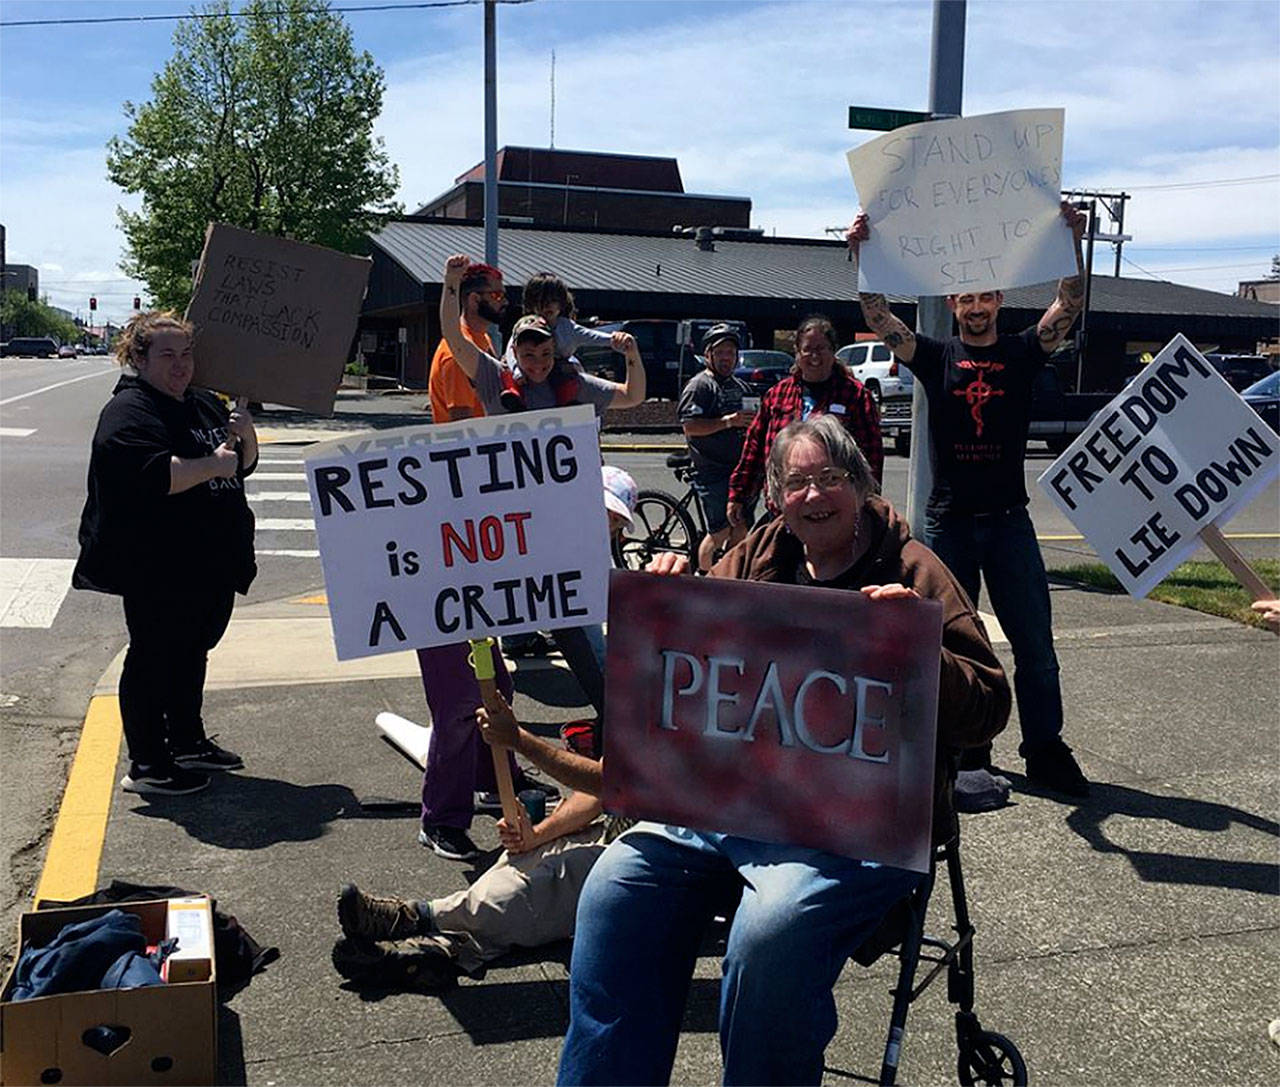 (Facebook) Local citizens protest the new ordinance that prohibits sitting on the sidewalk in downtown Aberdeen. For most of the past two days, Mike Nelson has been sitting on the sidewalk to protest what he says is an unconstitutional rule that unfairly targets homeless people.